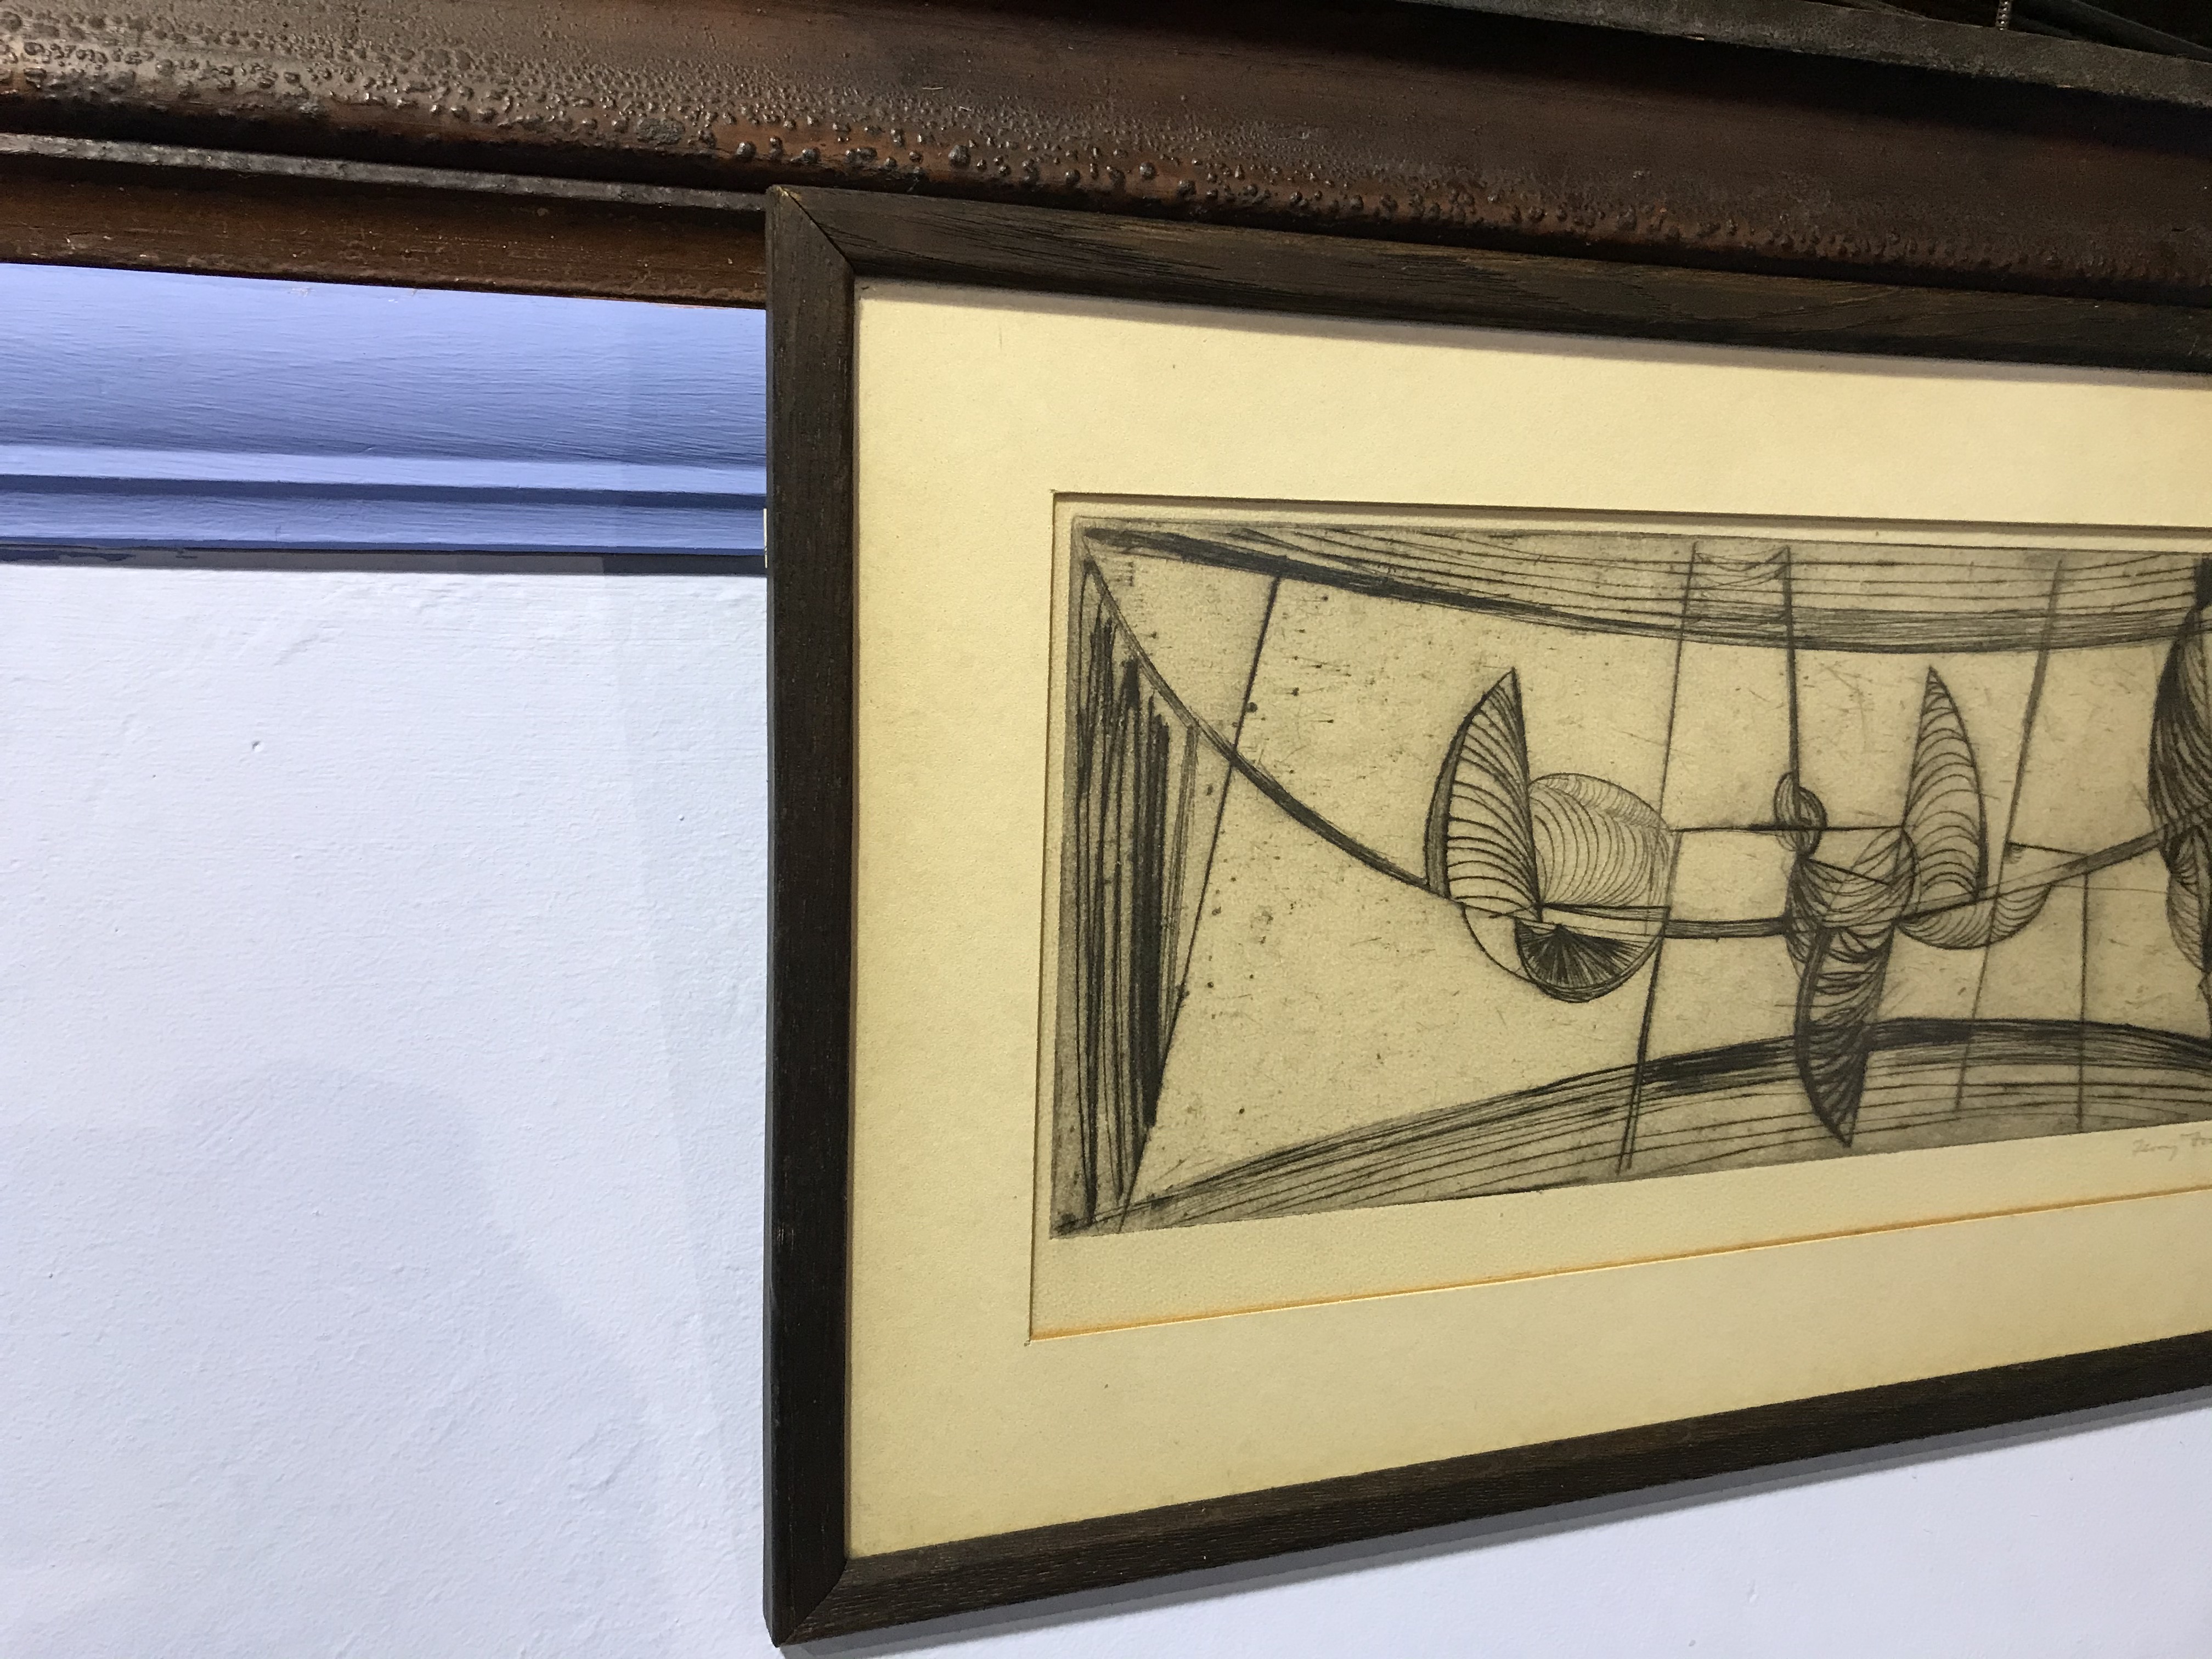 Sir Terry Frost RA, engraving, signed, dated **55, 'Bow Movement', 15 x 34cm, Provenance: Vendors - Image 4 of 5